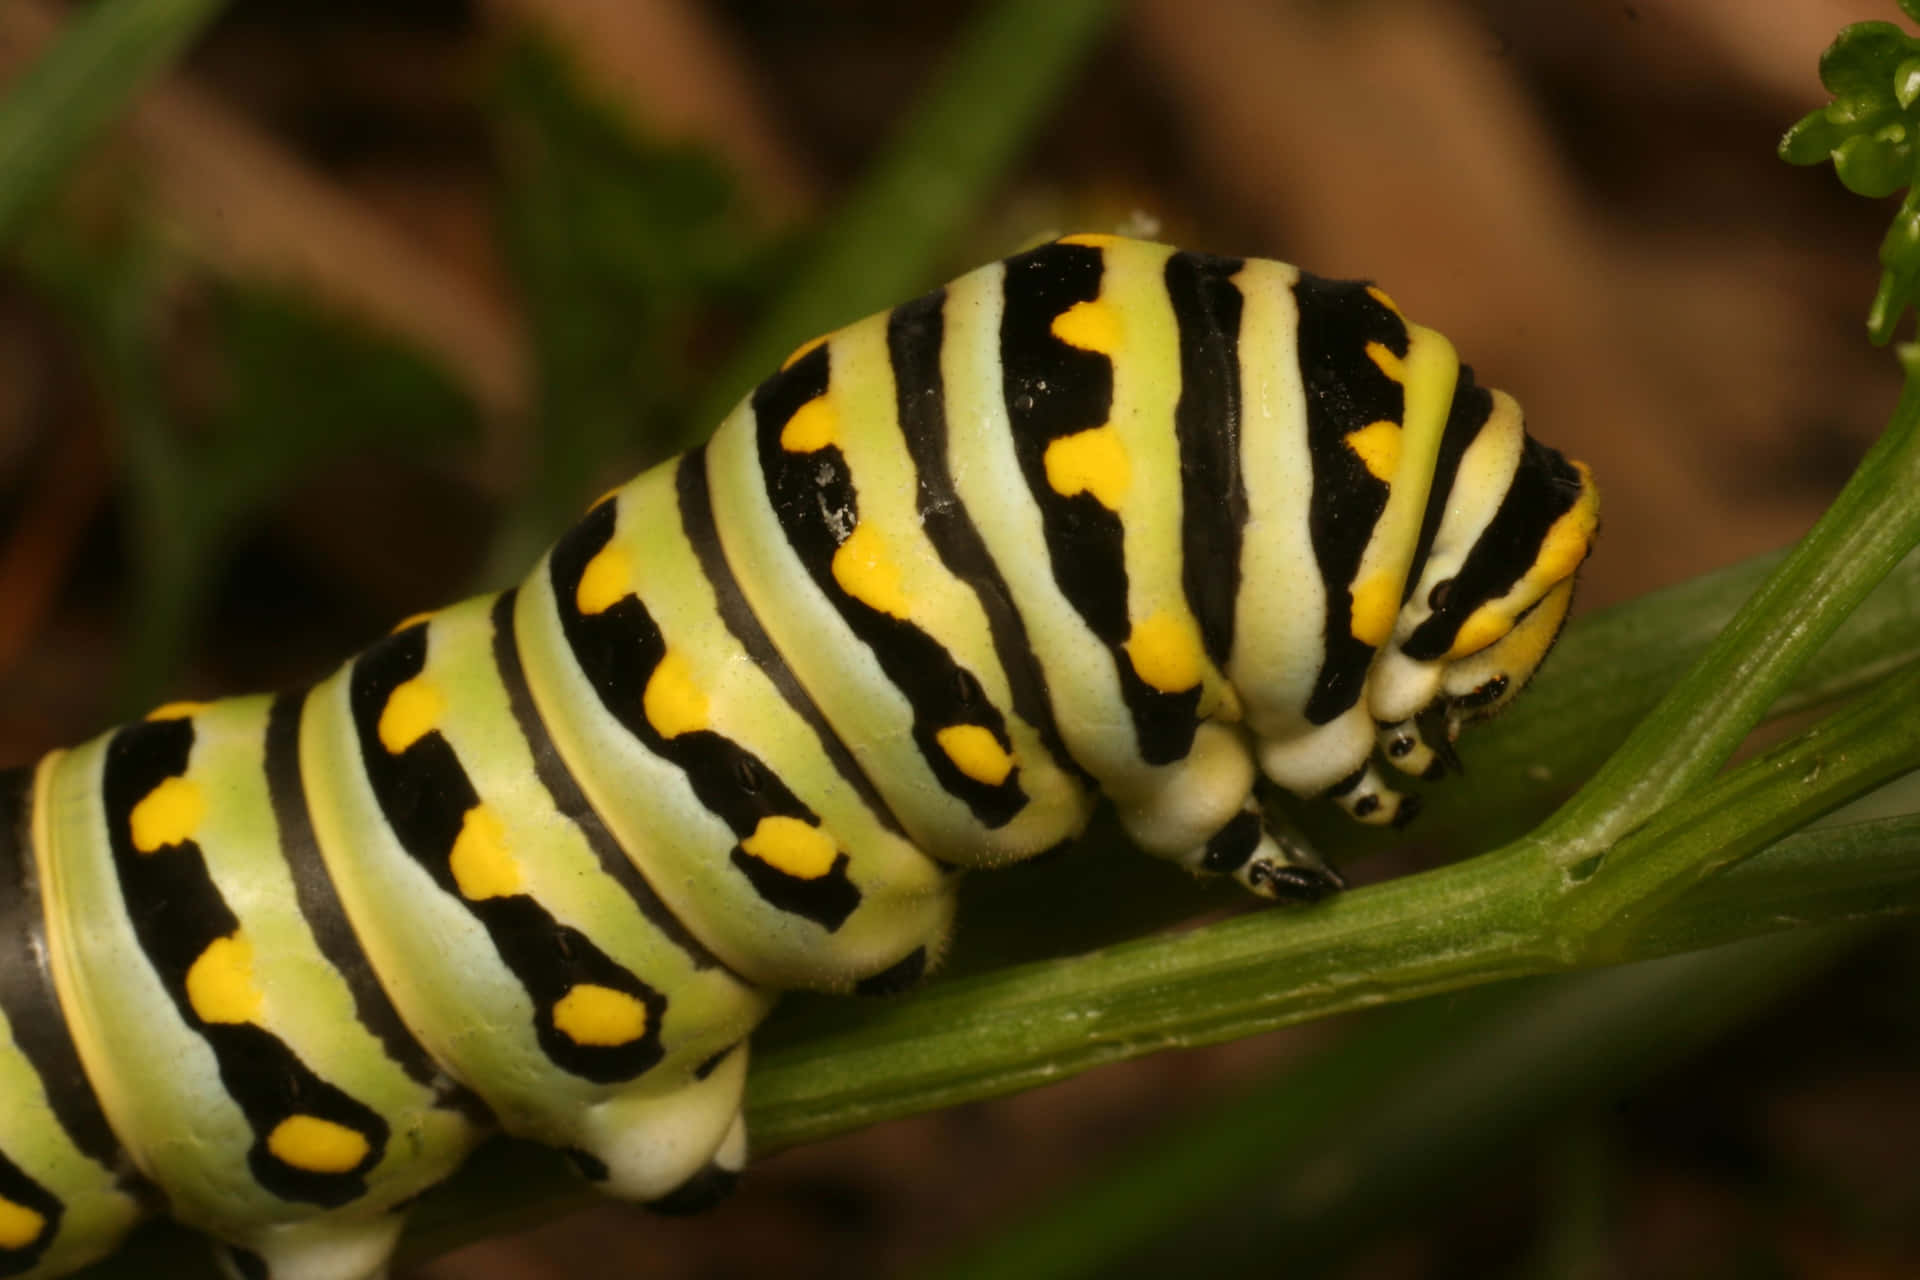 A Black And Yellow Caterpillar On A Green Plant